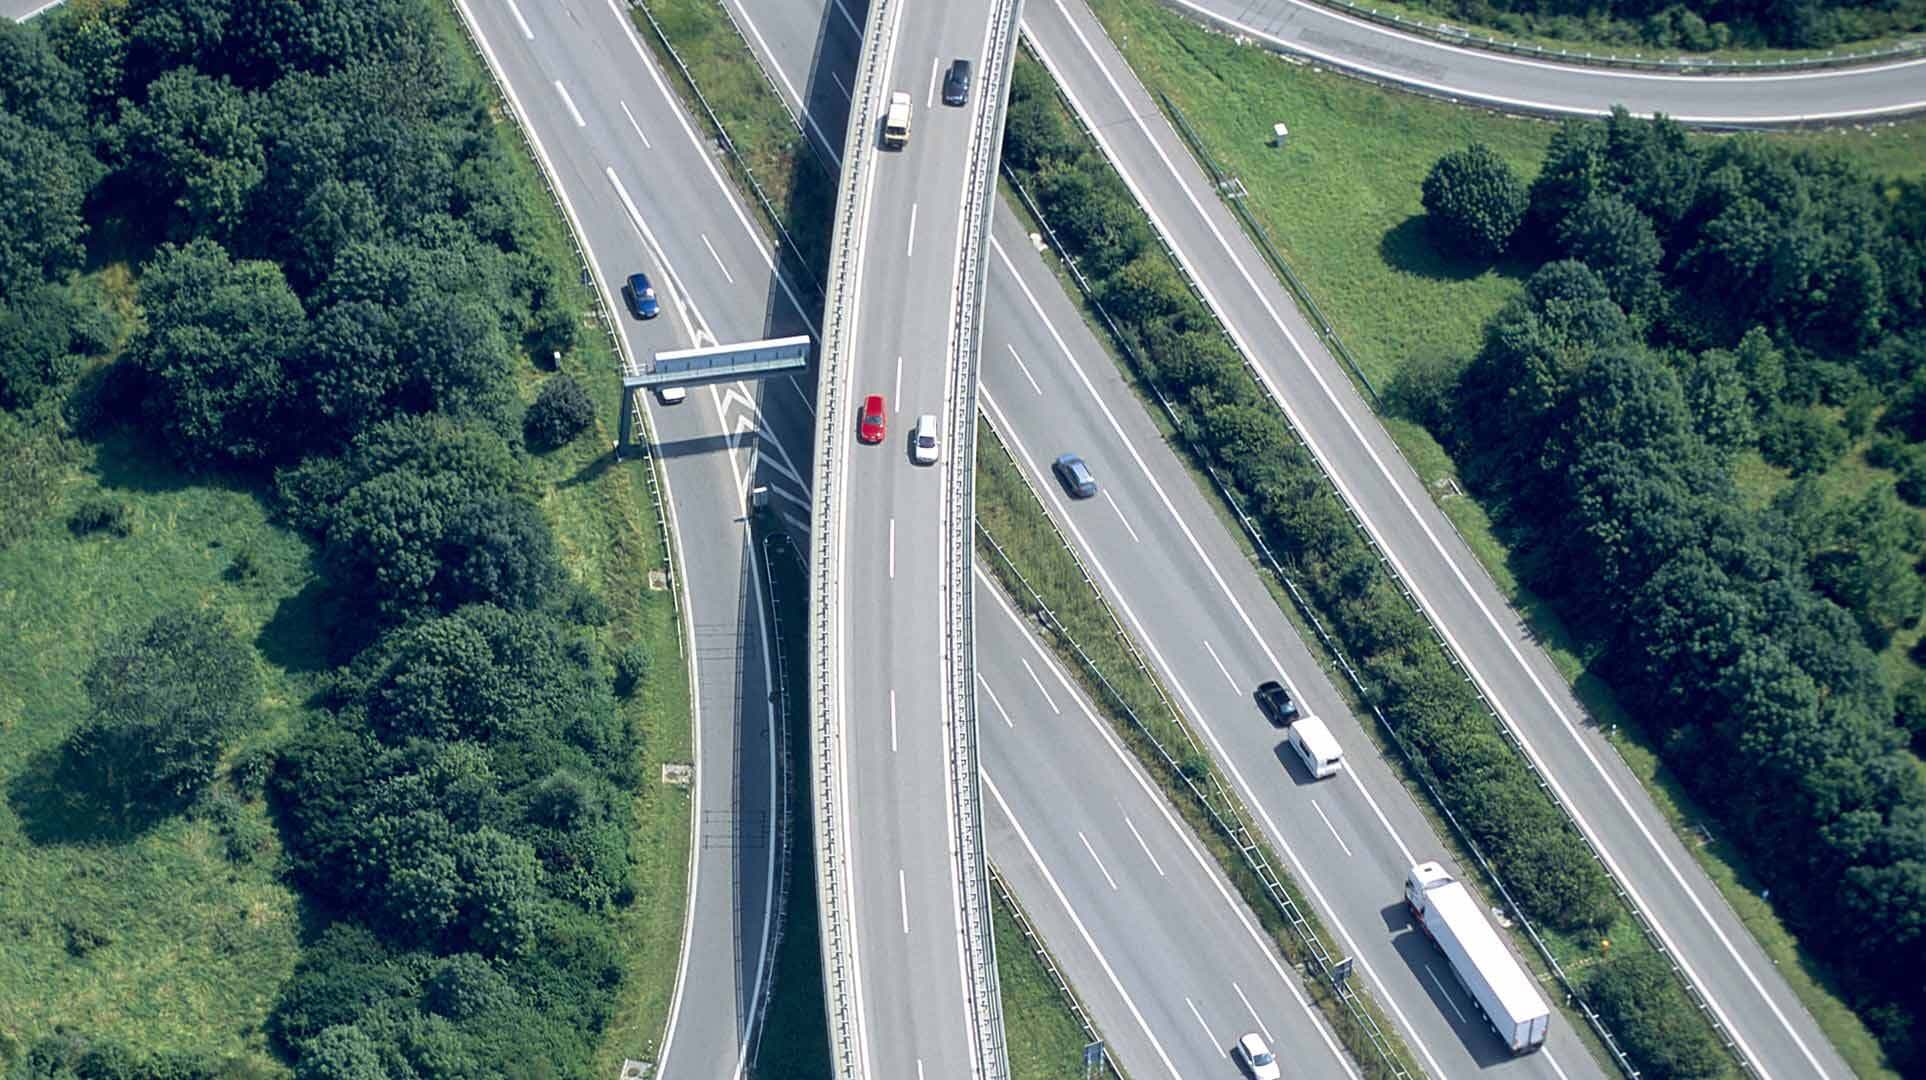 Aerial view of cars on road